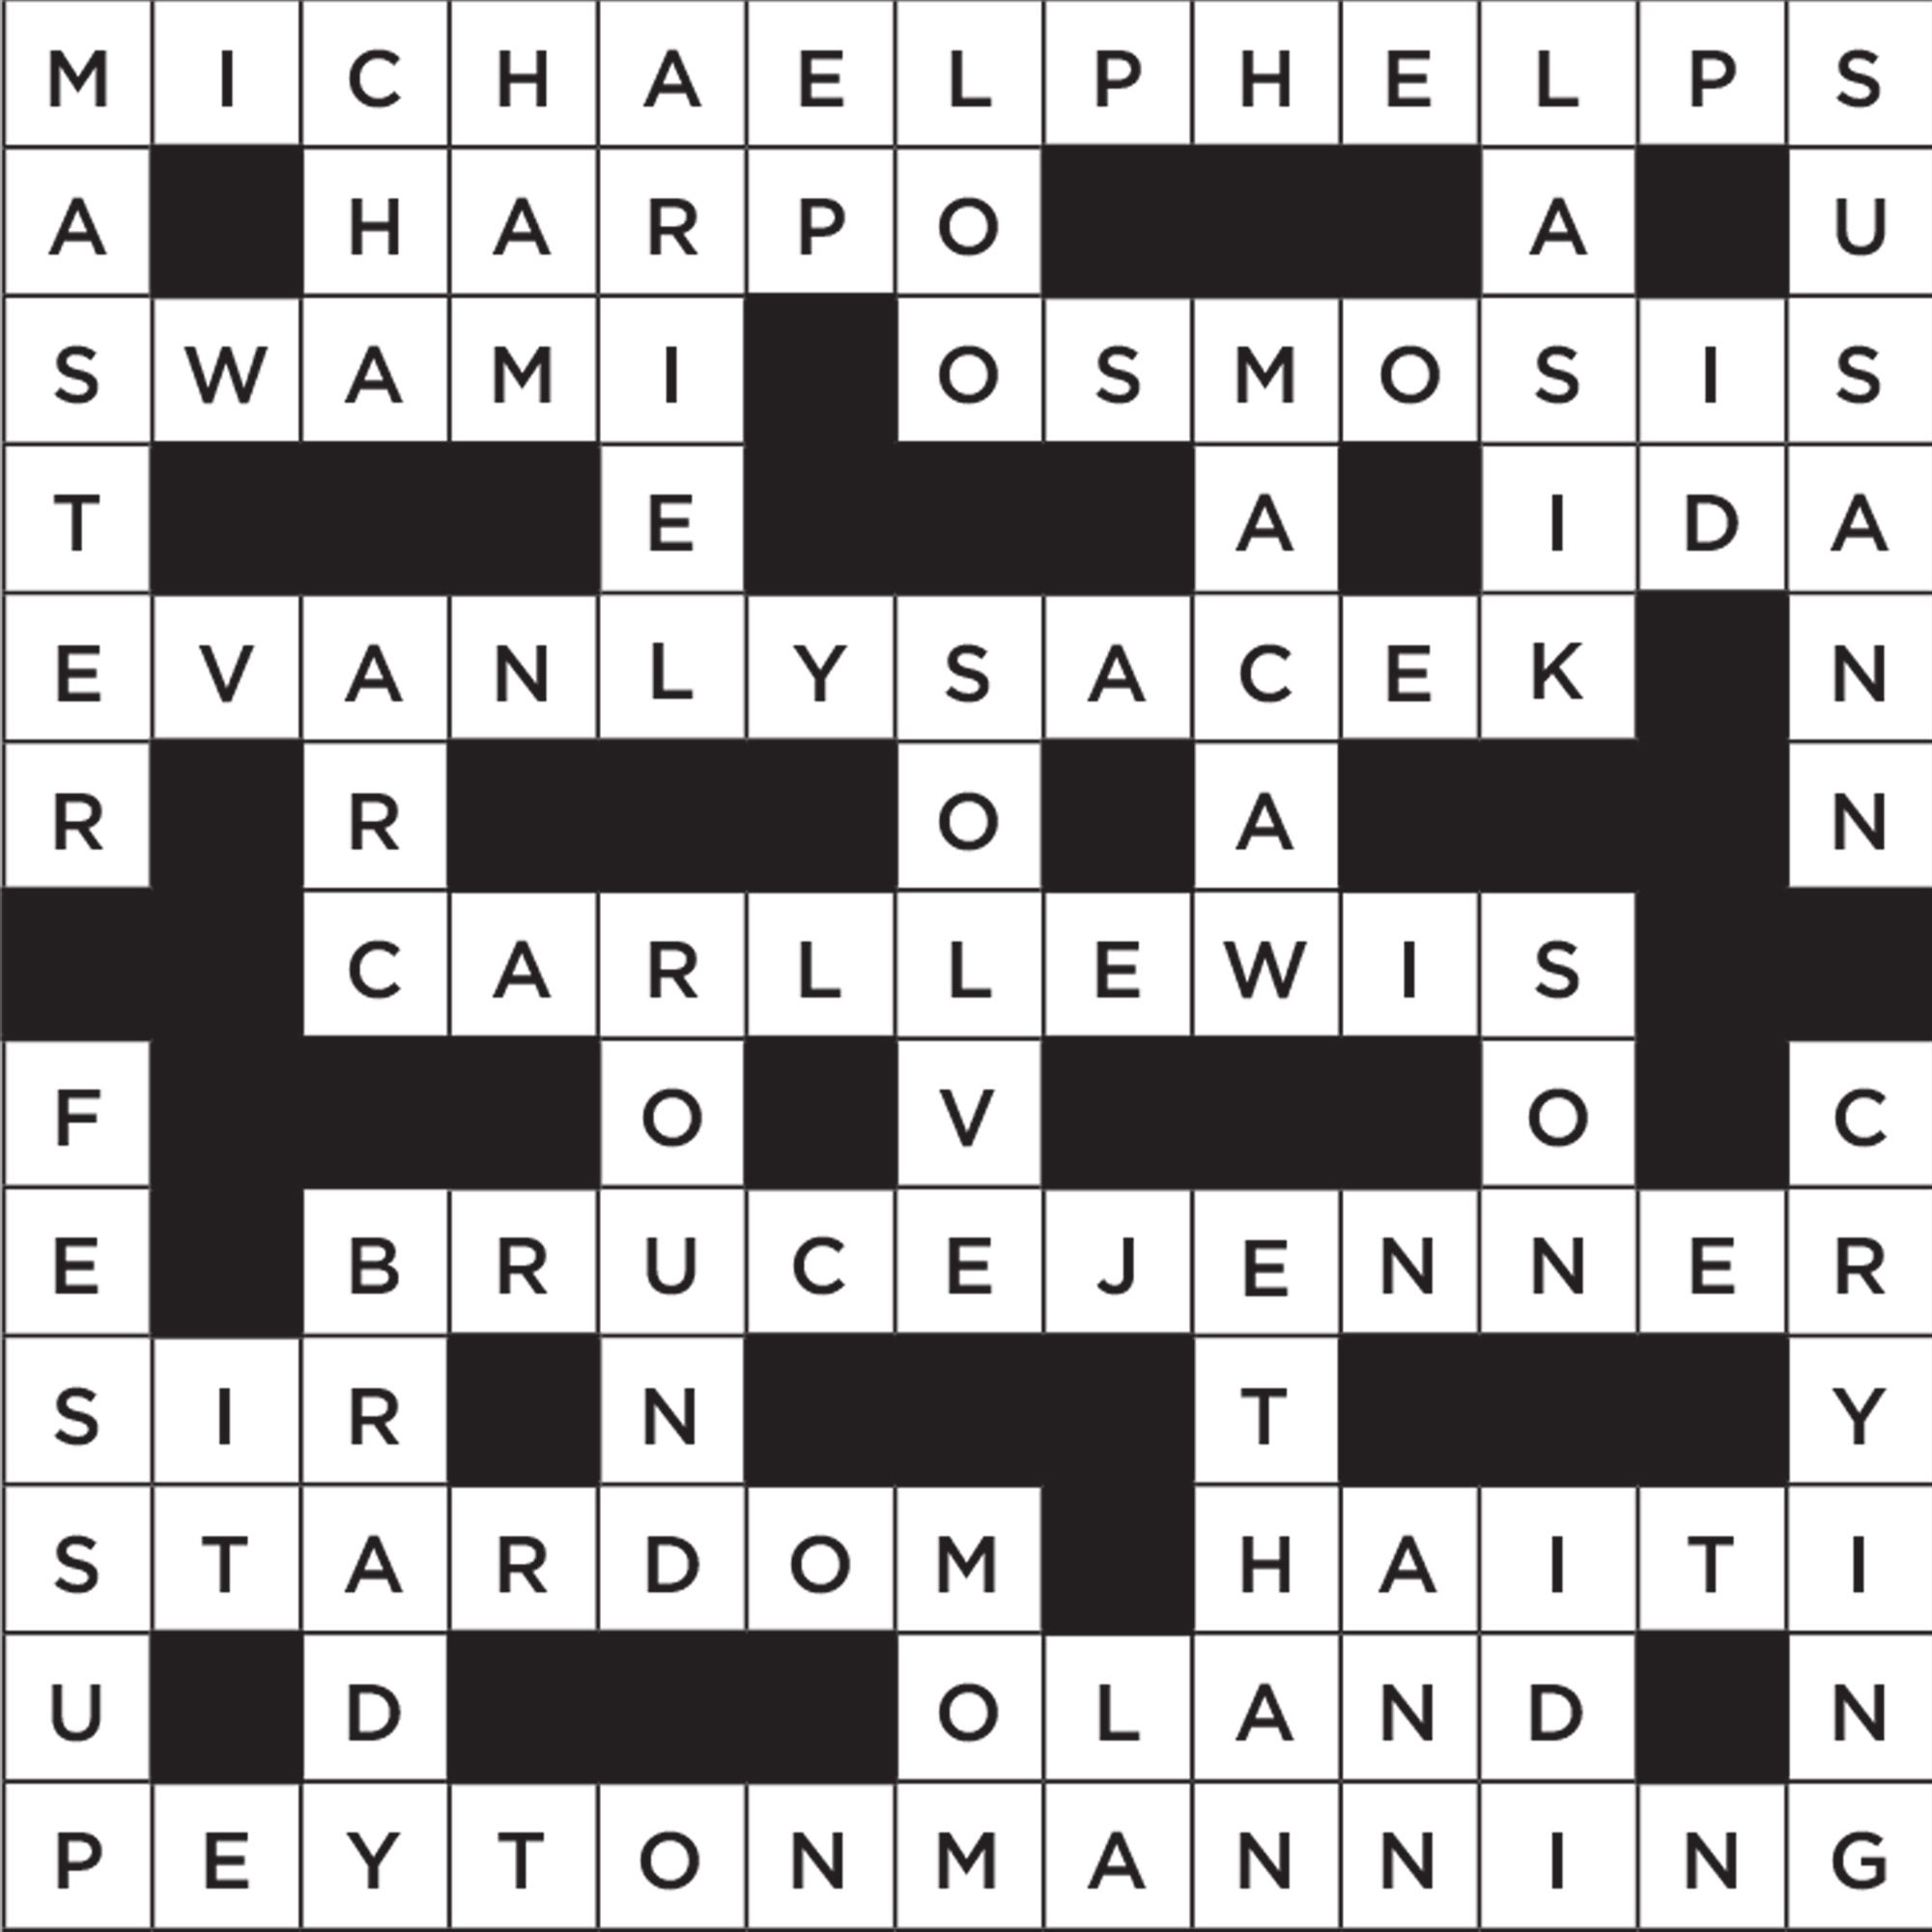 crossword-puzzles-with-answers-printable